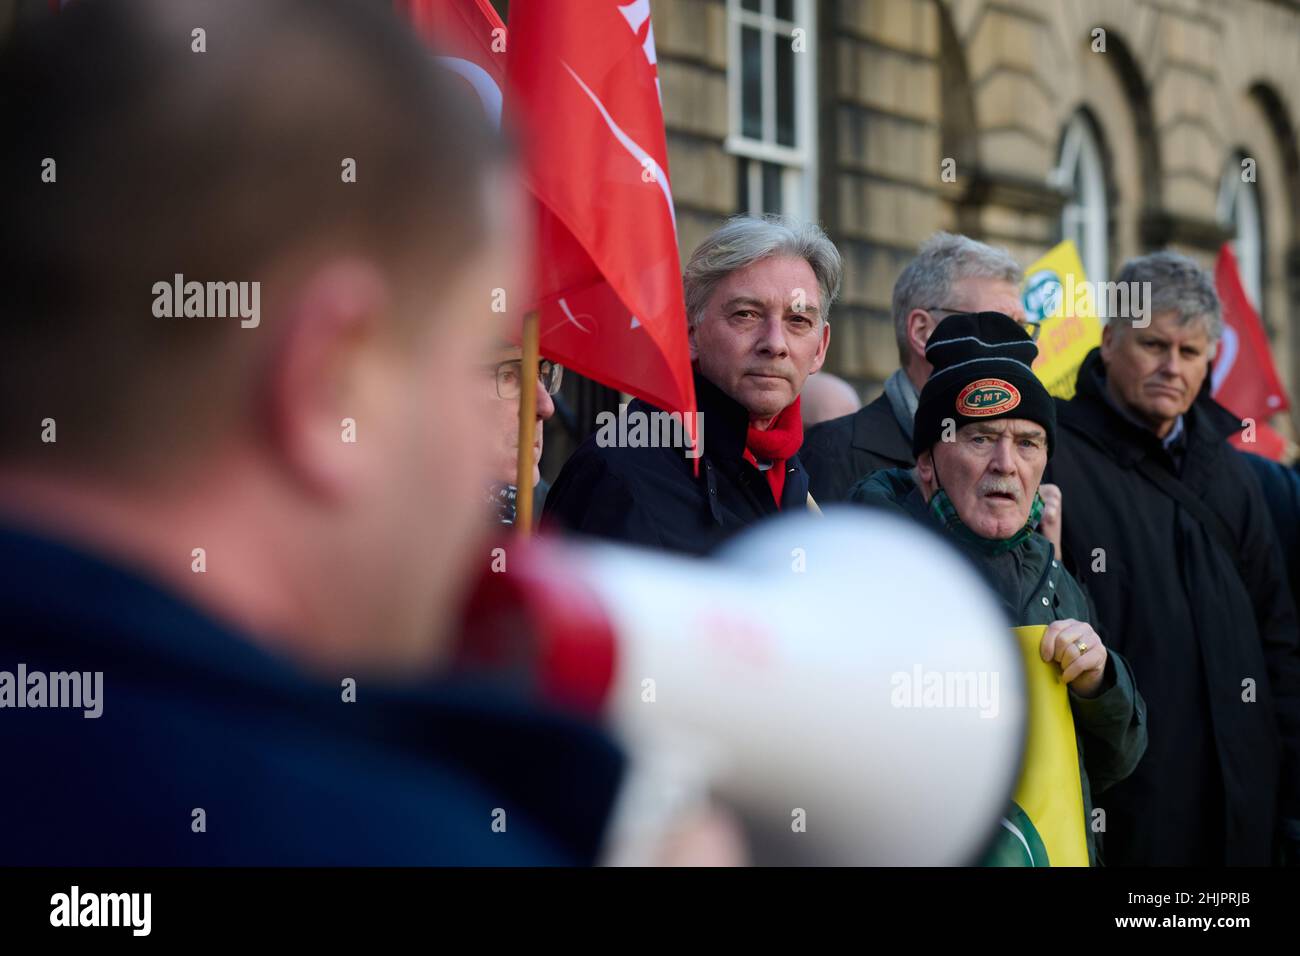 Edinburgh Scotland, UK January 31 2022. RMT Union rail, ferry and energy workers march from Waverley Station to Bute House, the Residence of Scotland’s First Minister to protest at the Scottish Government’s behaviour on a range of issues.  credit sst/alamy live news Stock Photo